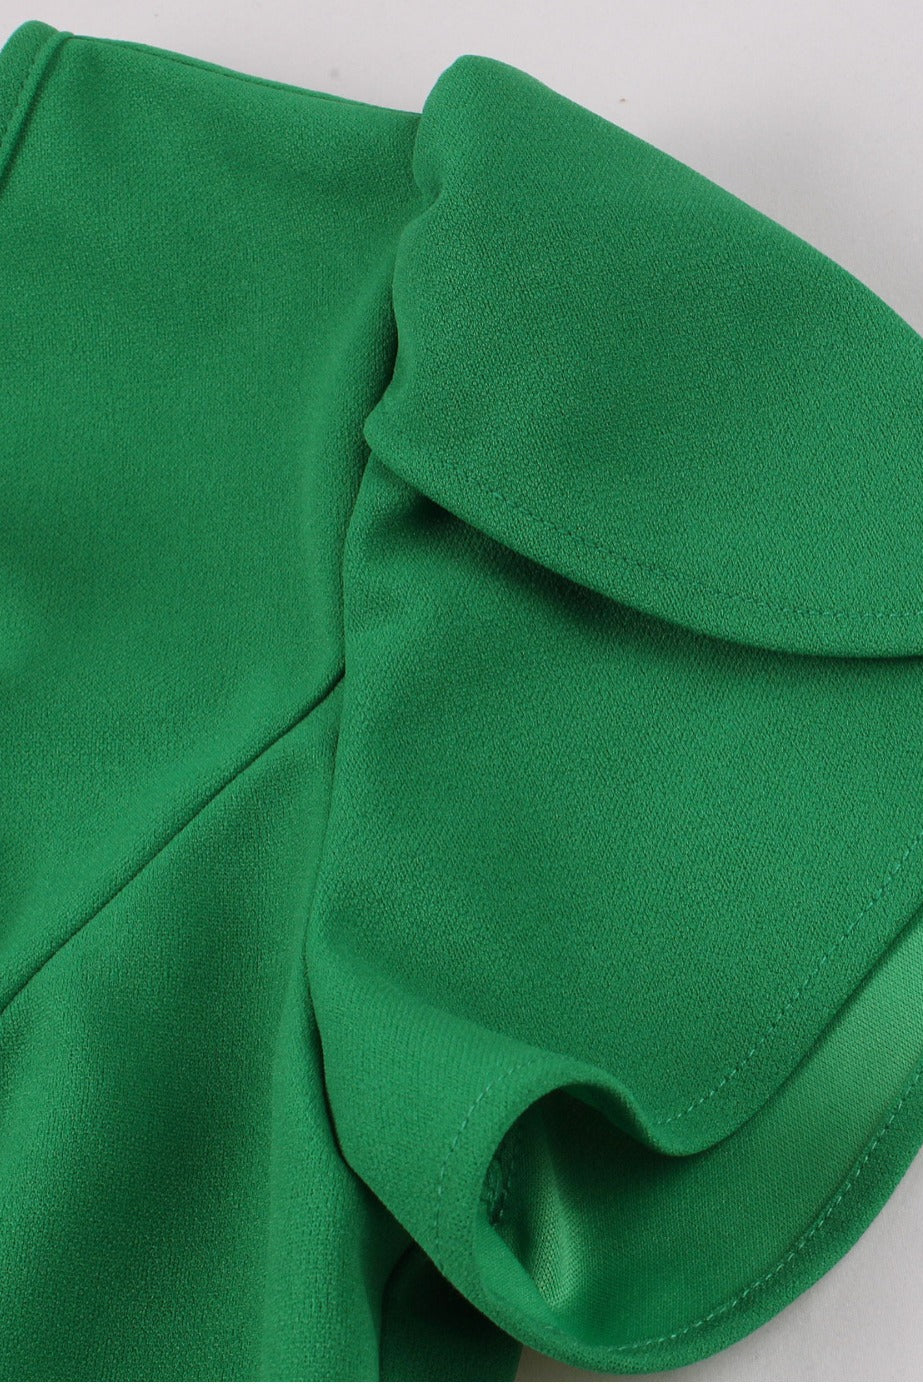 Green Bow Tie Detail Short Sleeves A-line Vintage Dress